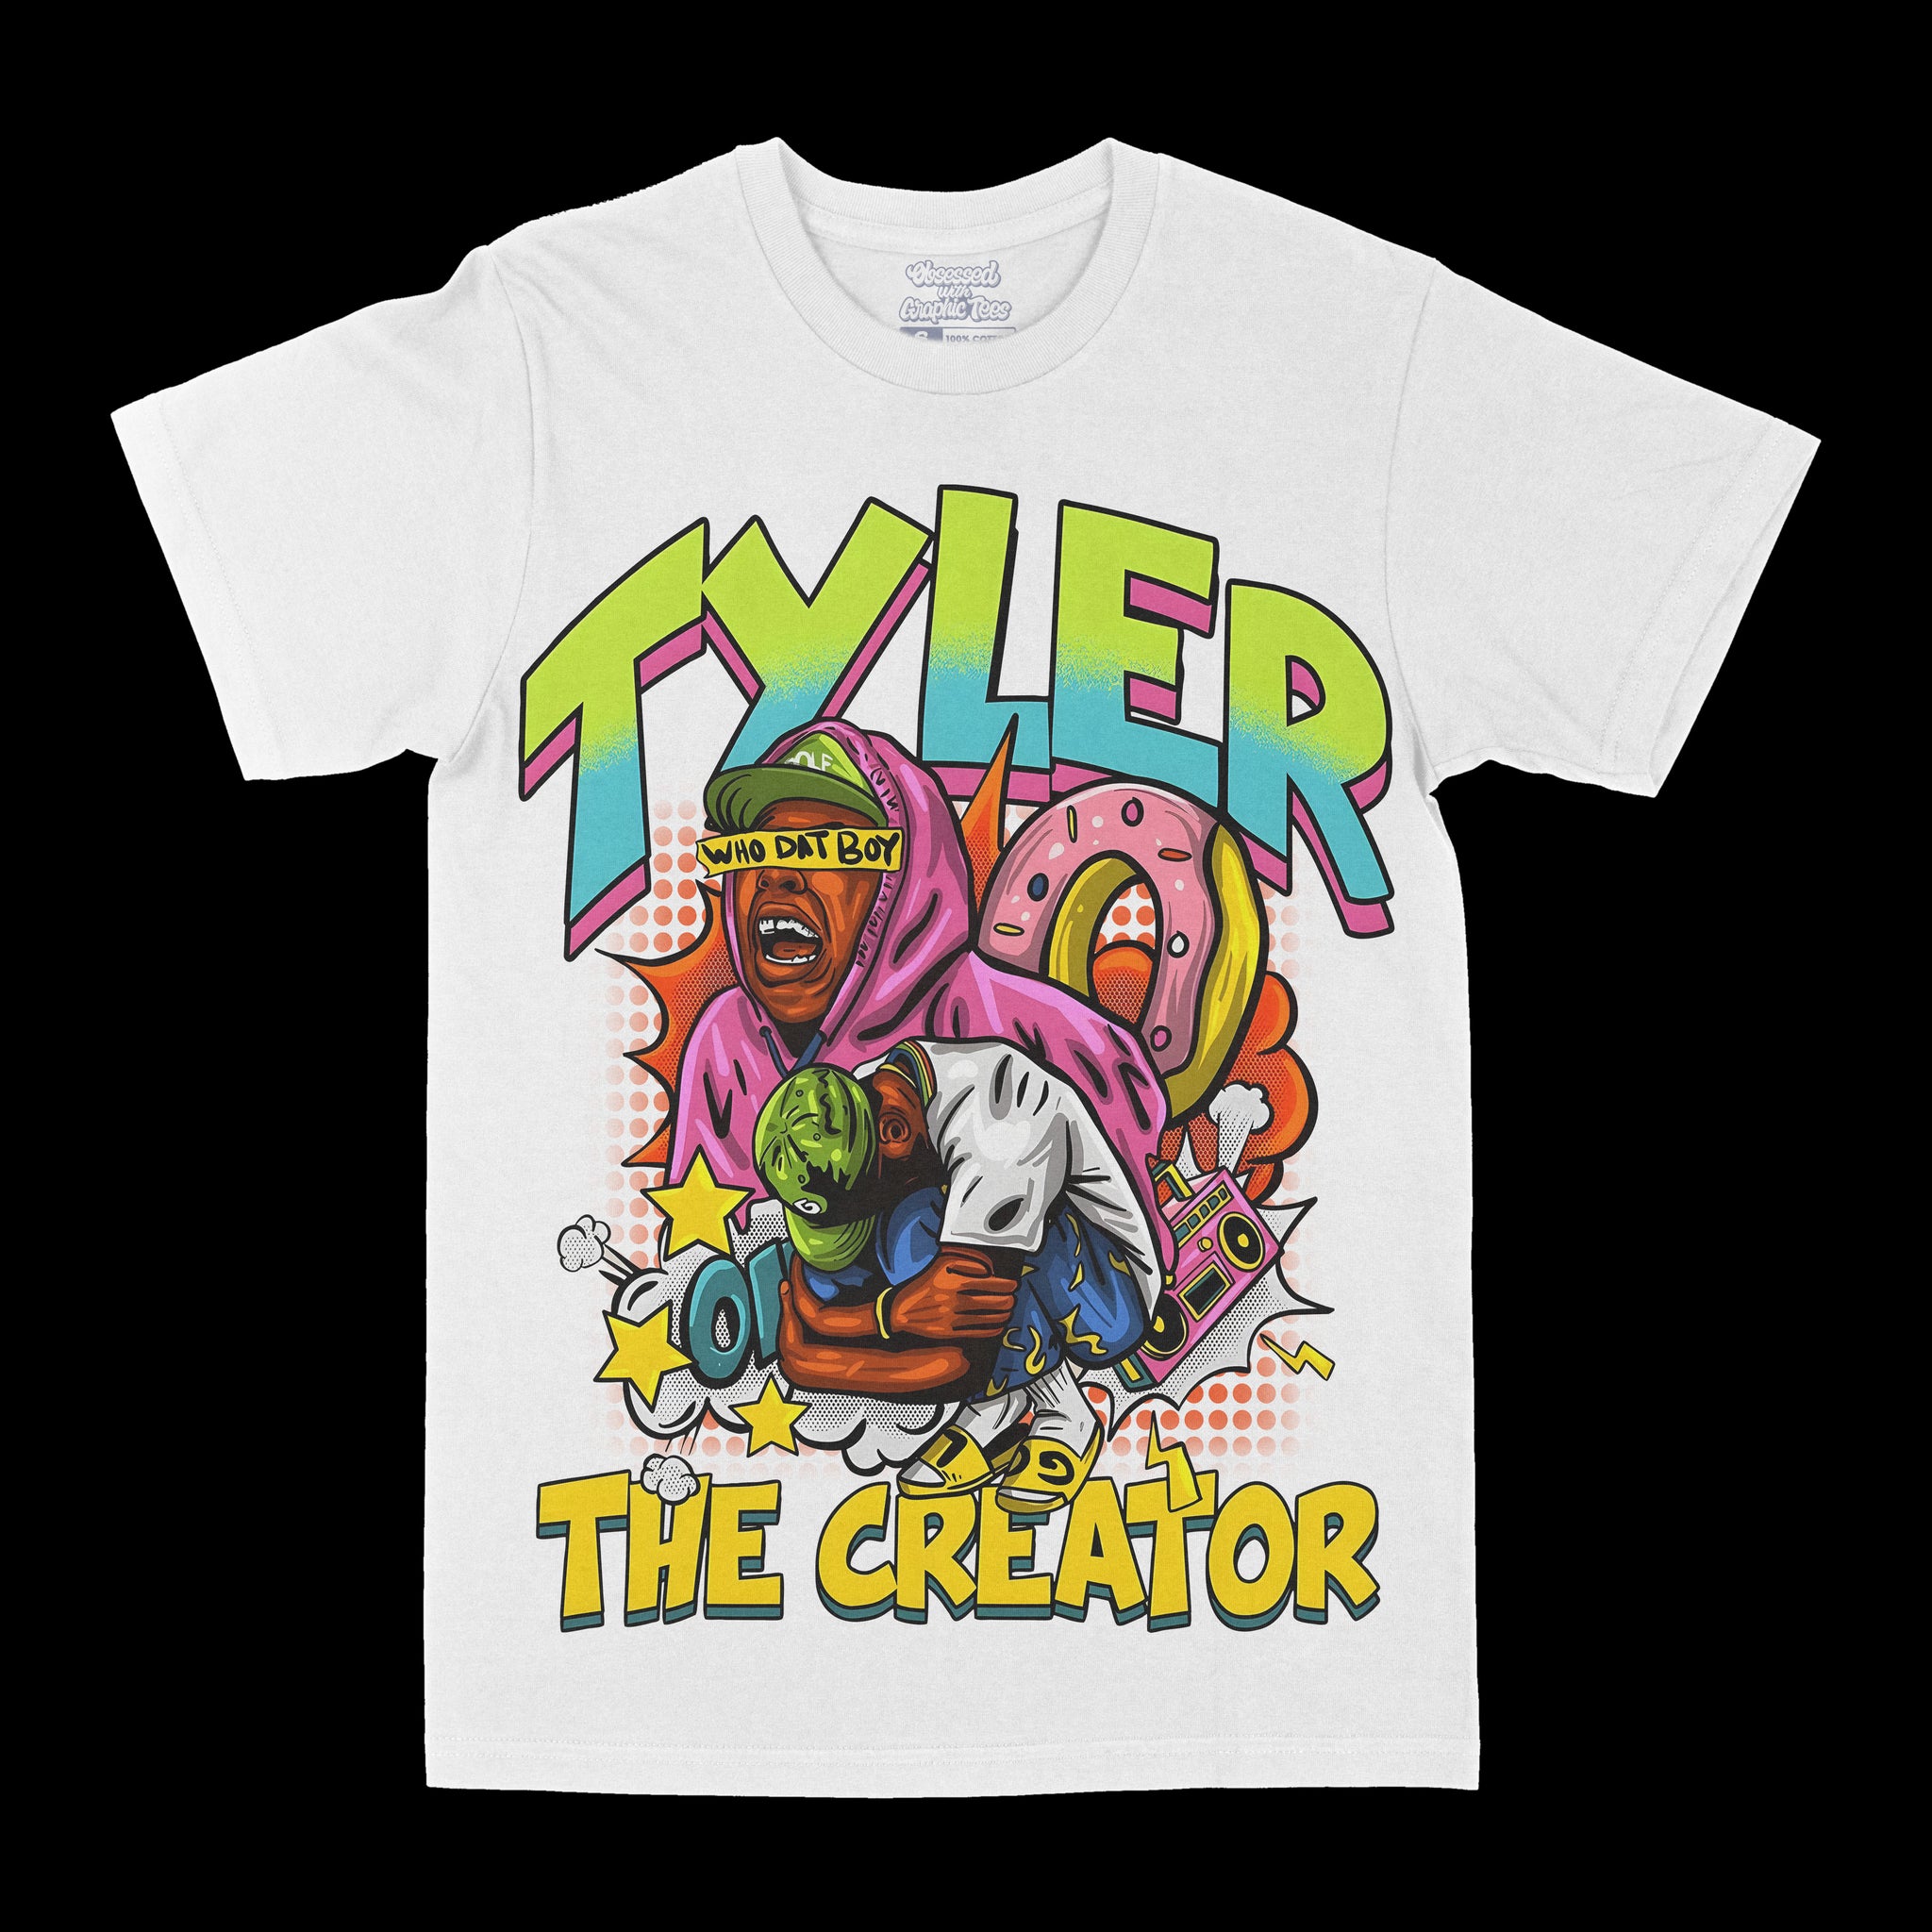 Tyler The Creator "Who Dat Boy" Graphic Tee